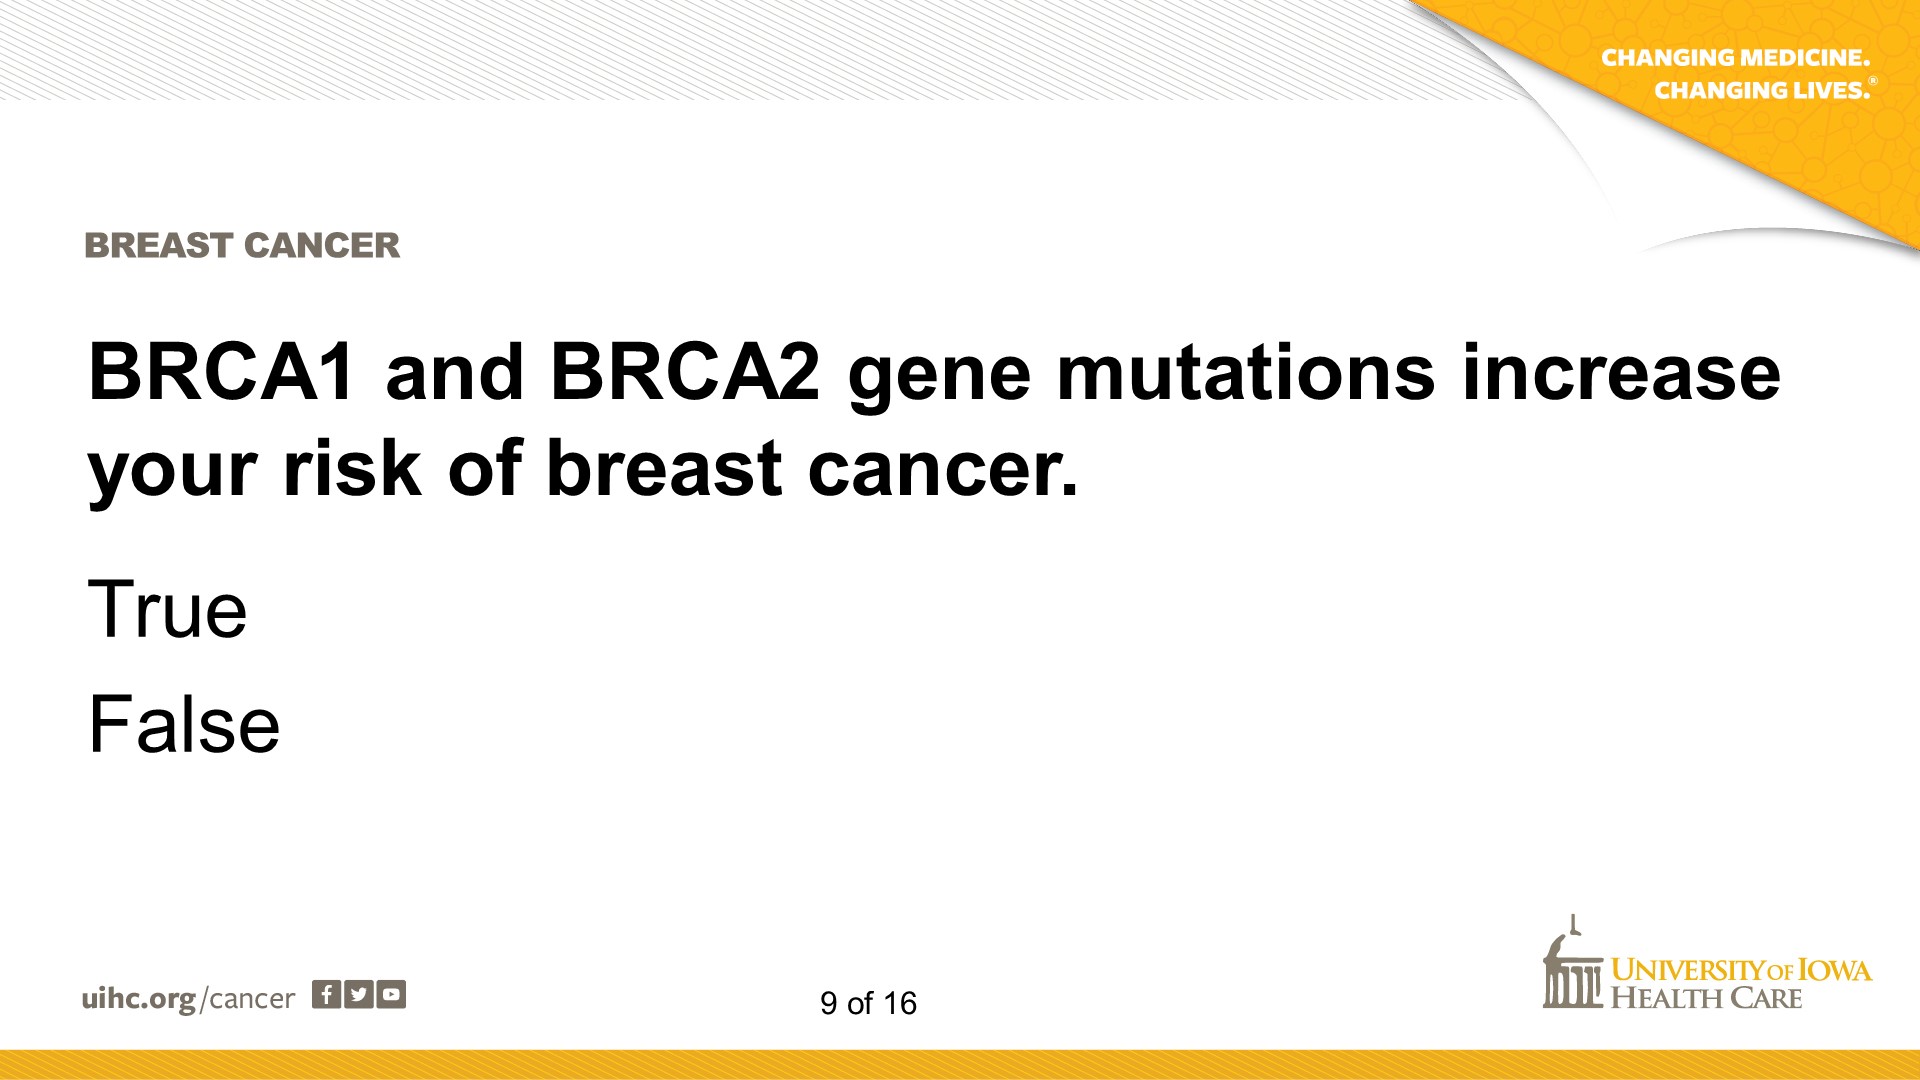 Do BRCA1 and BRCA2 gene mutation increase your risk of getting cancer?